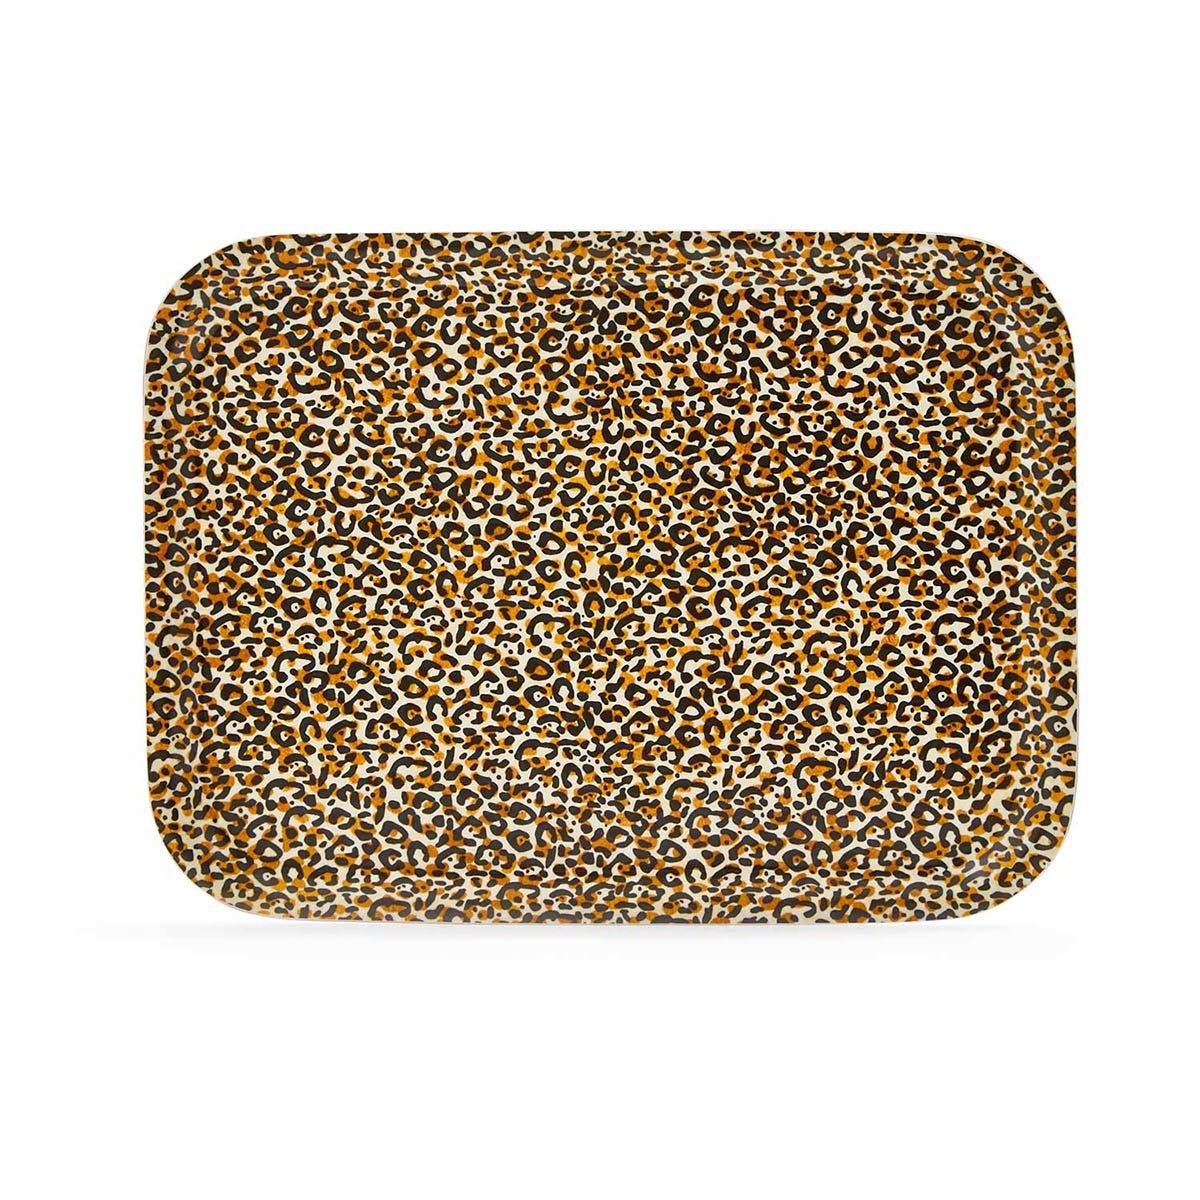 Creatures of Curiosity Leopard Print Tray